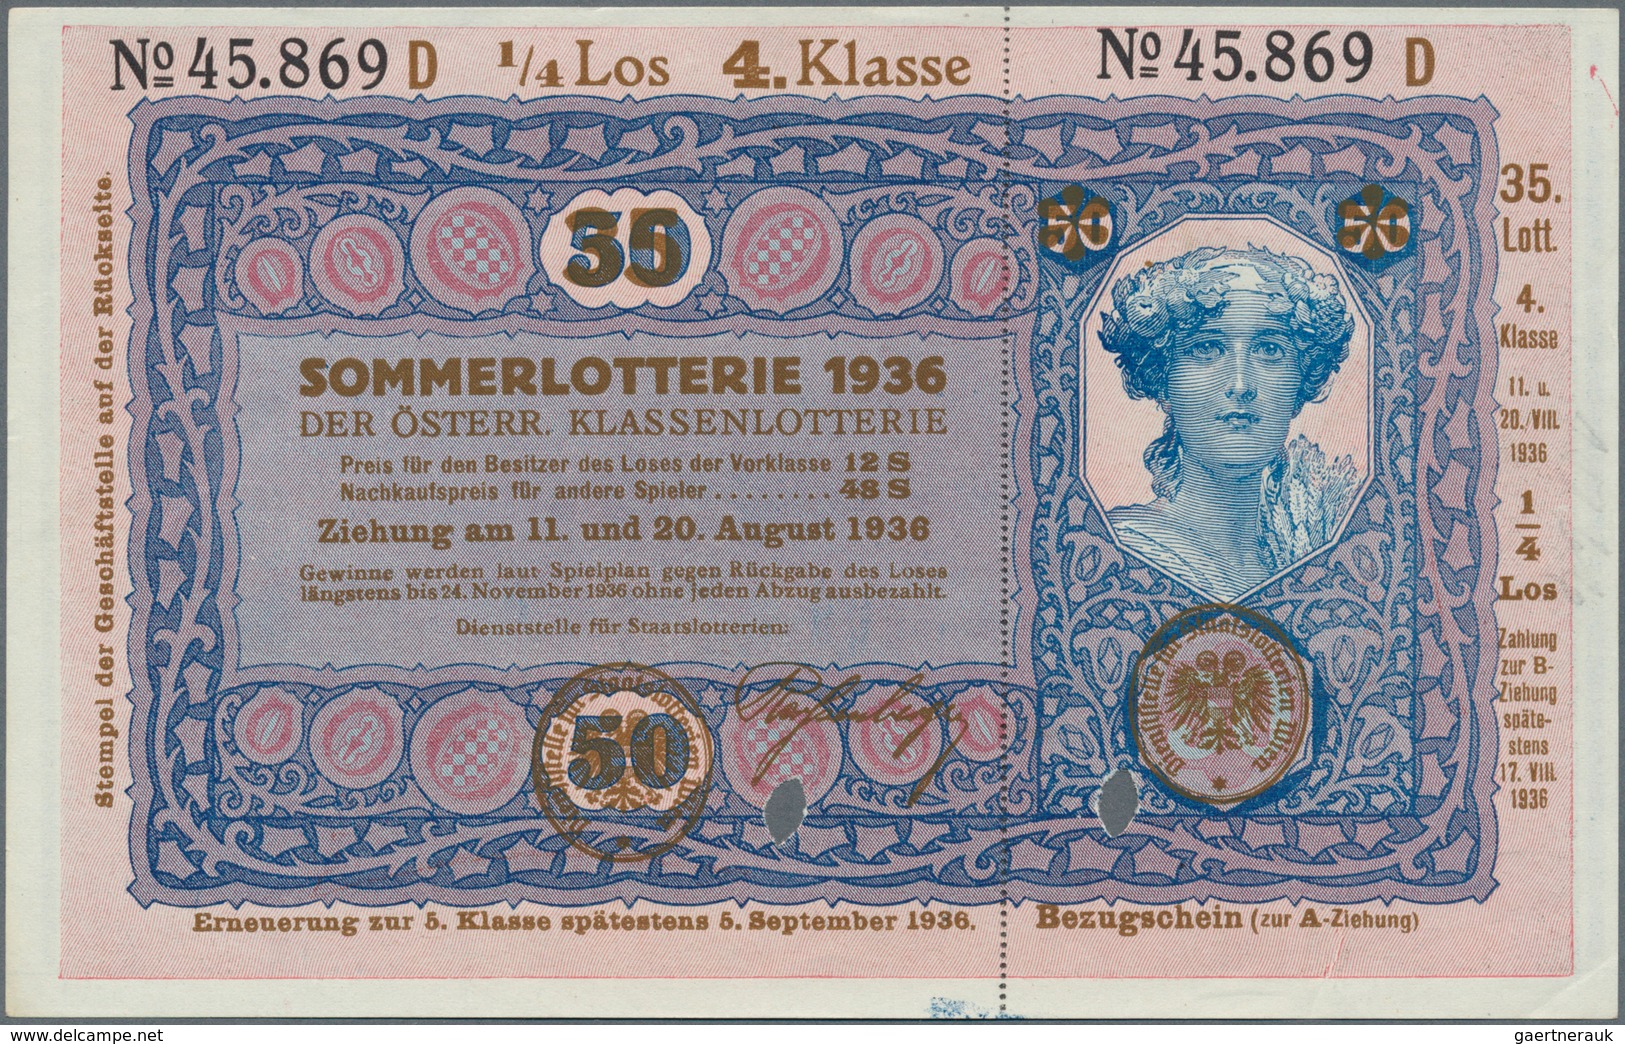 Austria / Österreich: Donaustaat Set With 3 Notes With Lottery Overprint On 50 Schilling 1923 P. S15 - Austria